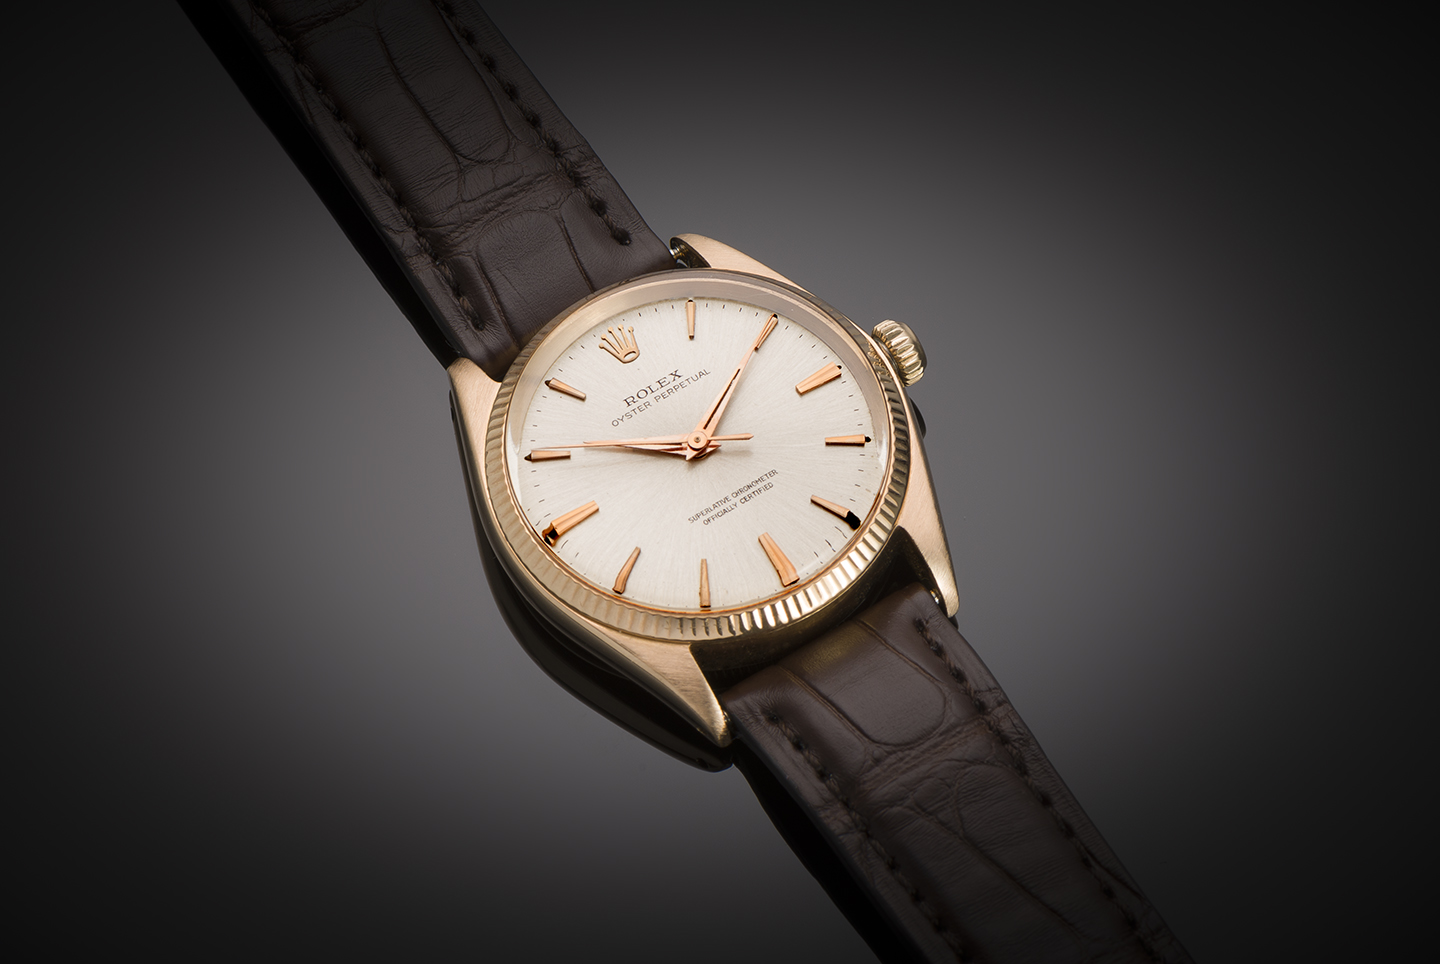 Vintage Rolex Oyster Perpetual pink gold watch (circa 1960)-1